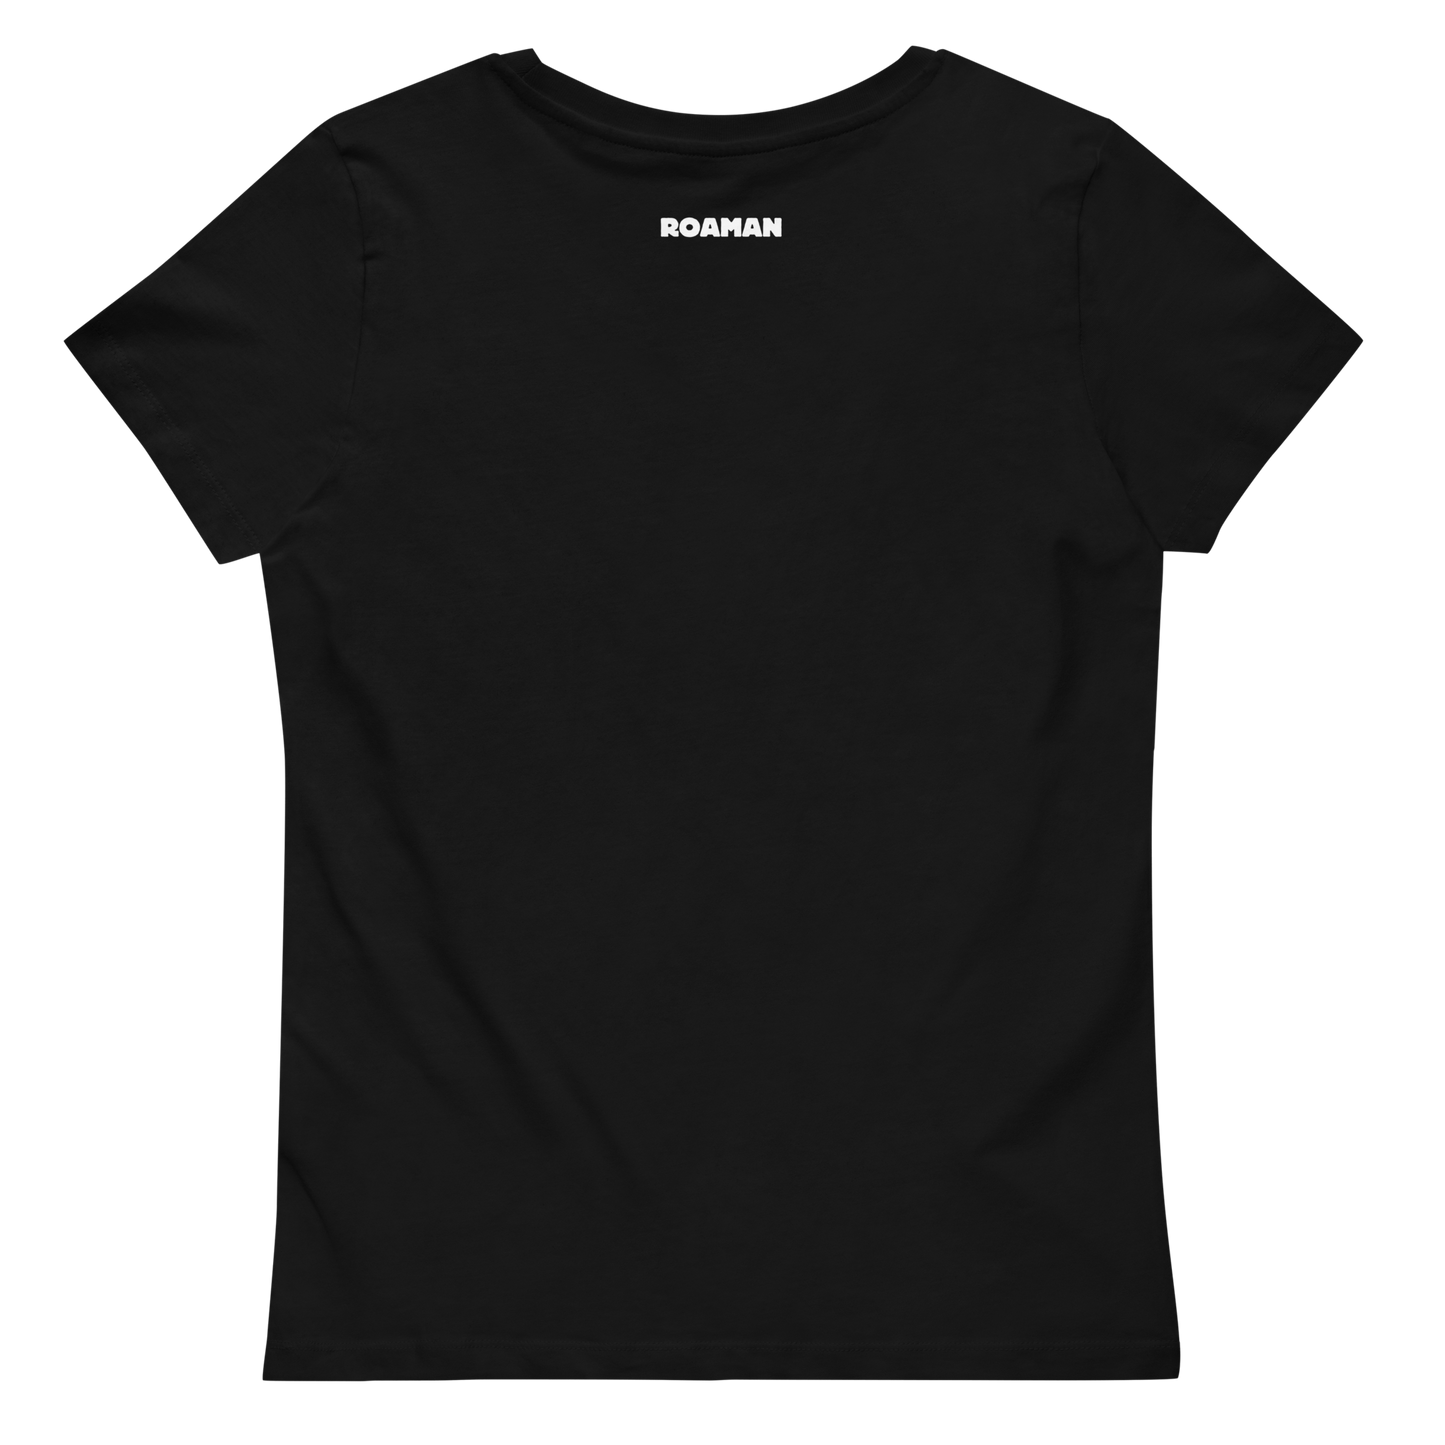 KUNDALICIOUS | Women's fitted eco tee